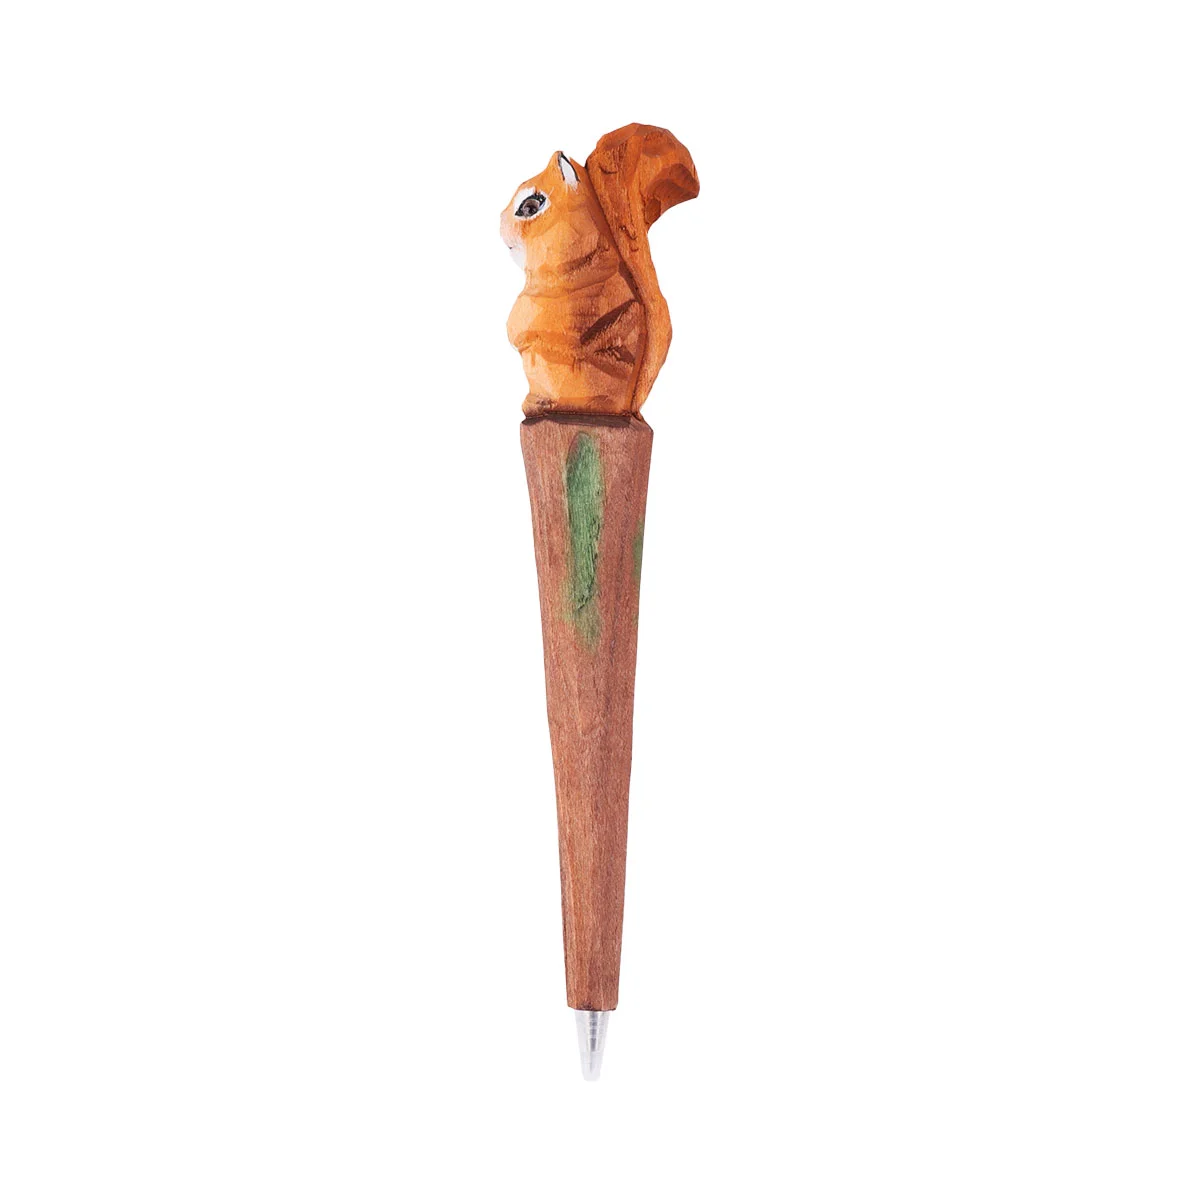 

Pure Handmade Wood Carving Animal Pen Creative Wood Carving Squirrel Ballpoint Pen Replaceable Refill Gel Pen for Students